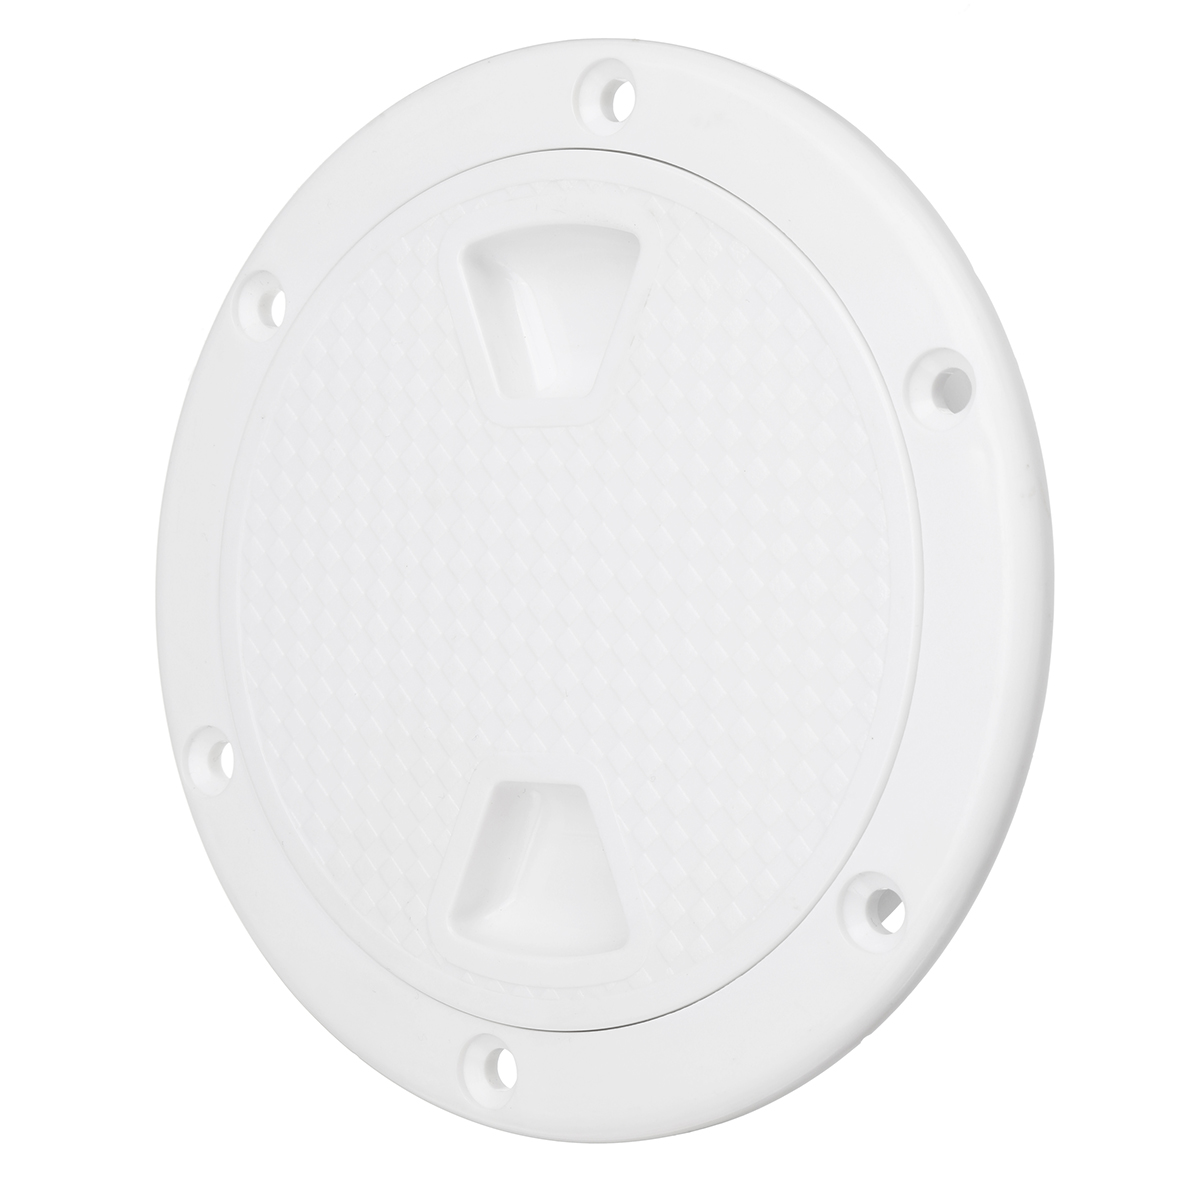 4/6/8 Inch round Deck Plate Cover for Yacht Boat Accessorise Marine ABS White - Auto GoShop